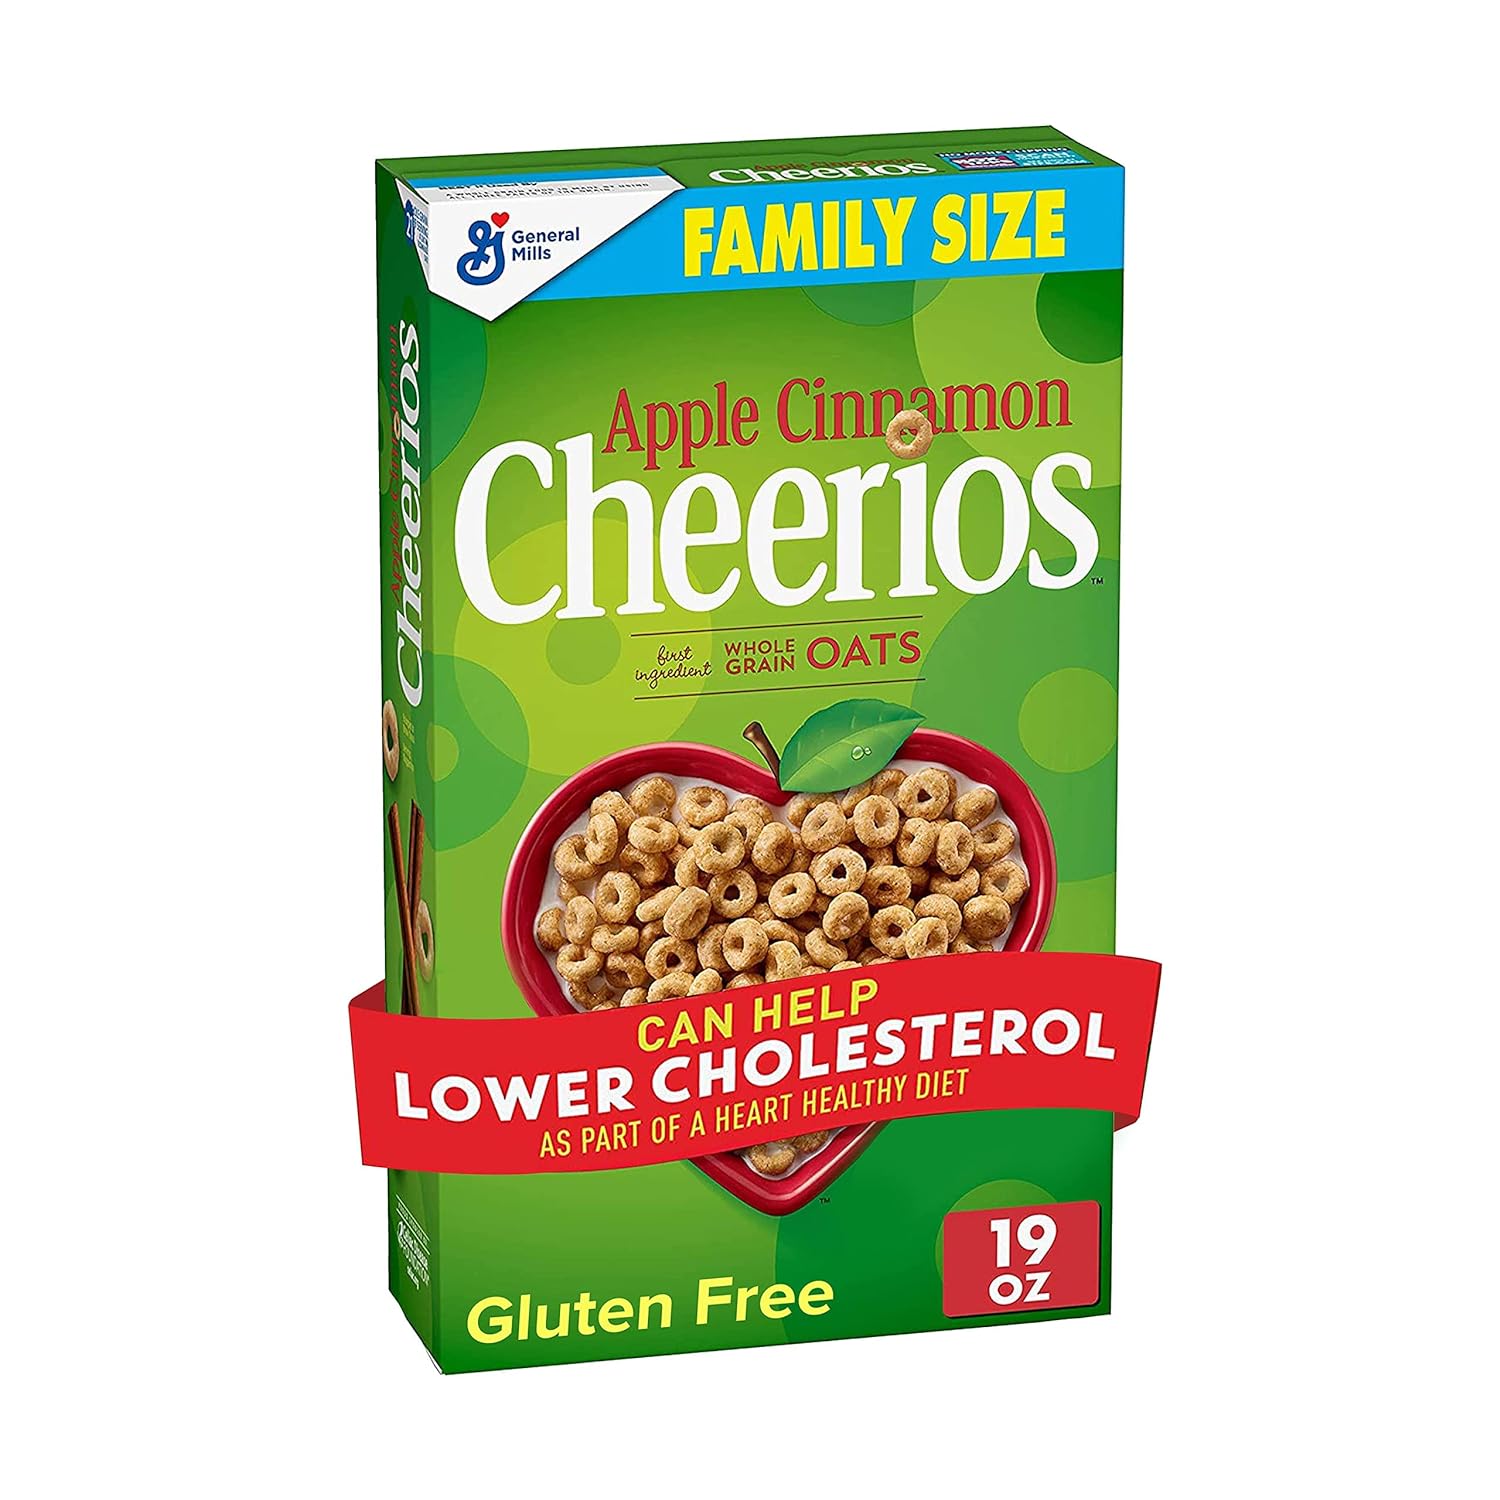 Apple Cinnamon Cheerios Cereal, Limited Edition Happy Heart Shapes, Heart Healthy Cereal With Whole Grain Oats, Family Size, 19 oz